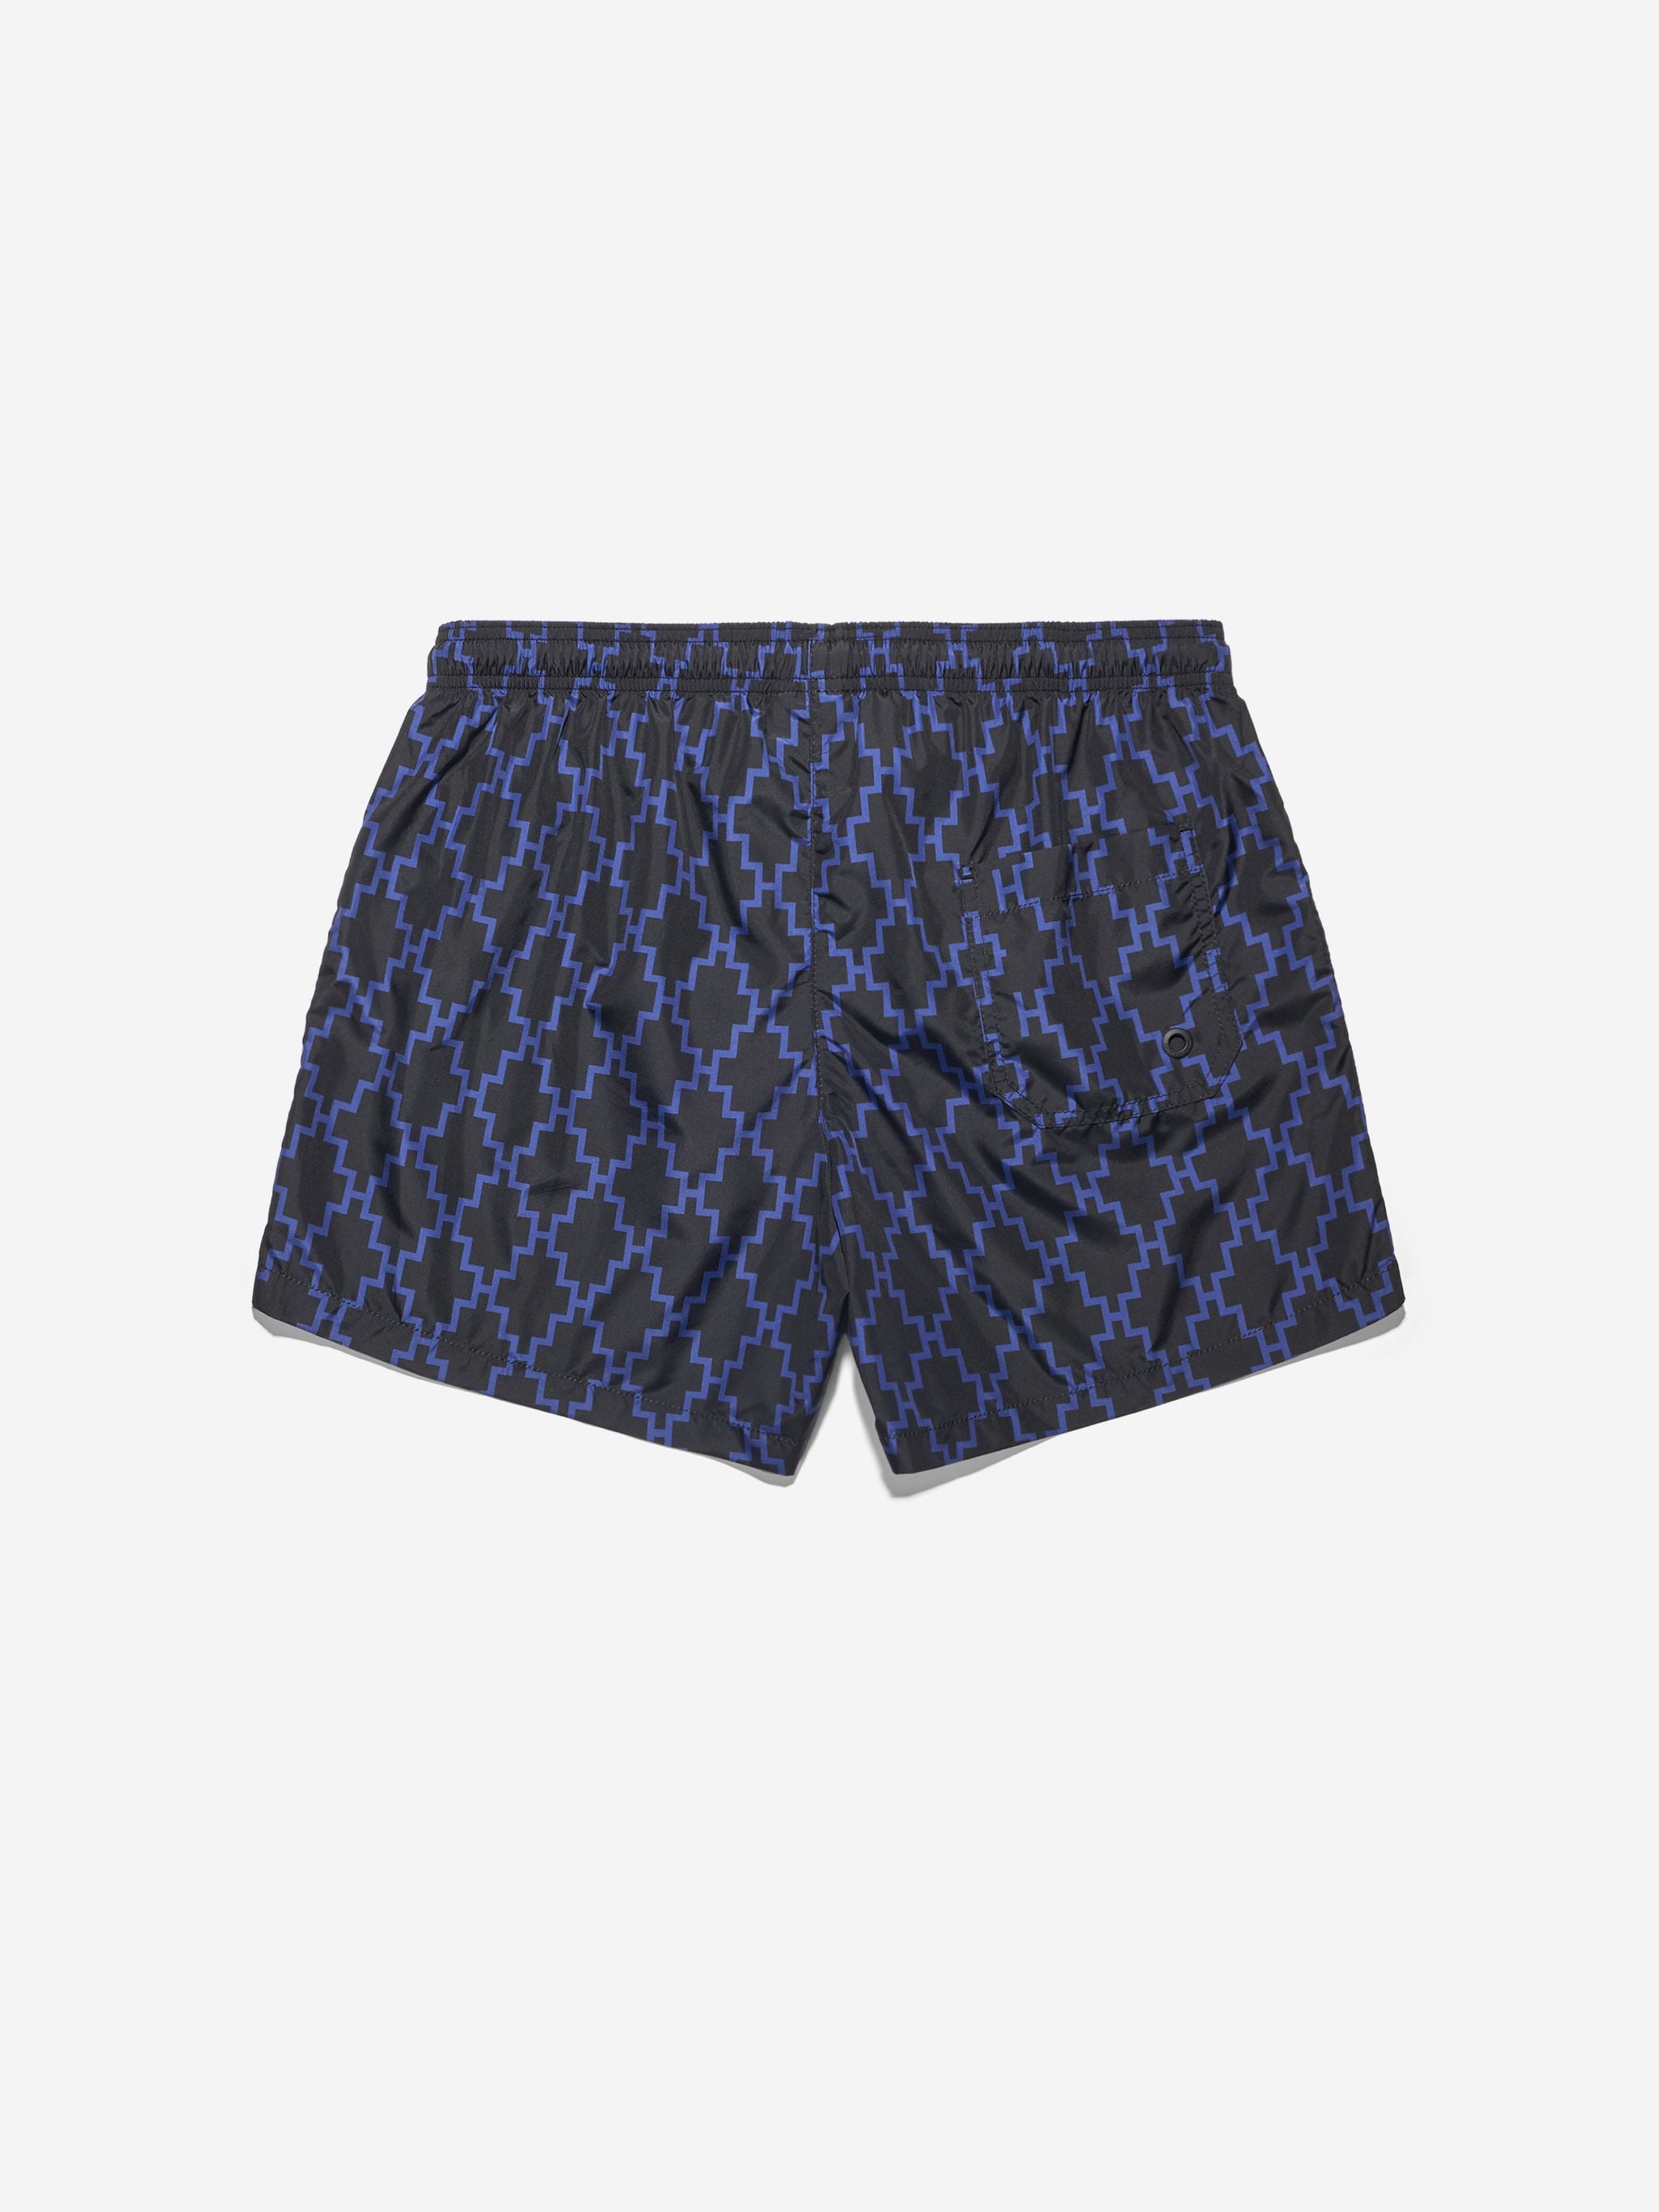 Black and blue cross pattern swimming shorts from Marcelo Burlon County of Milan featuring elasticated waistband, drawstring fastening, two side slit pockets, embroidered logo to the front, rear pouch pocket and eyelet detailing. Be mindful to try on swimwear over your own garments..